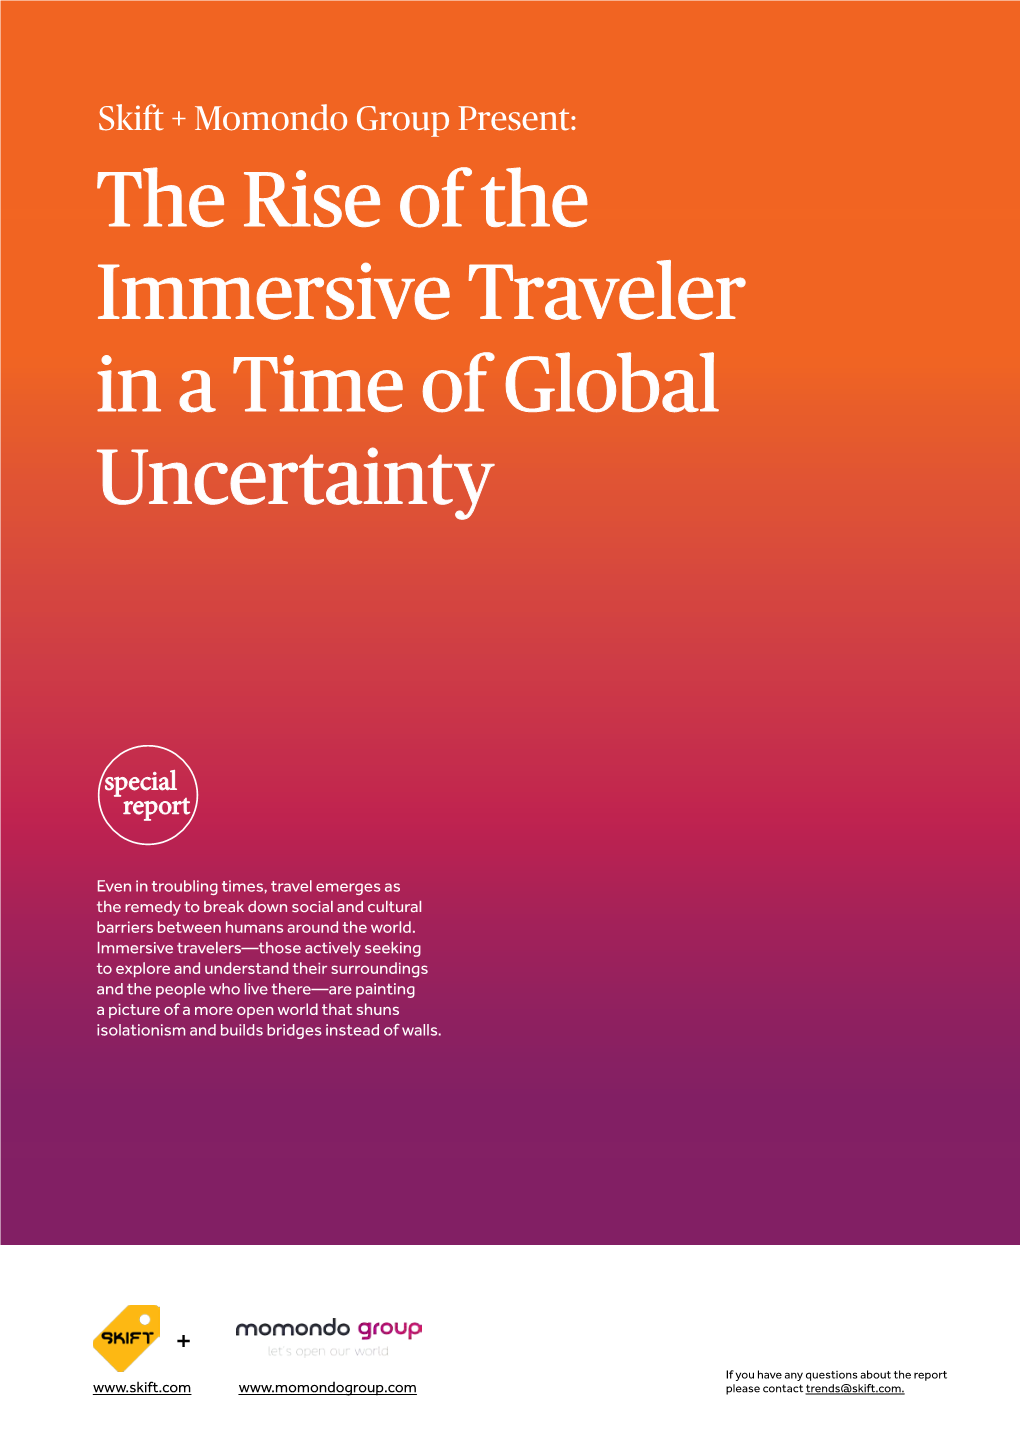 The Rise of the Immersive Traveler in a Time of Global Uncertainty SKIFT REPORT 2016